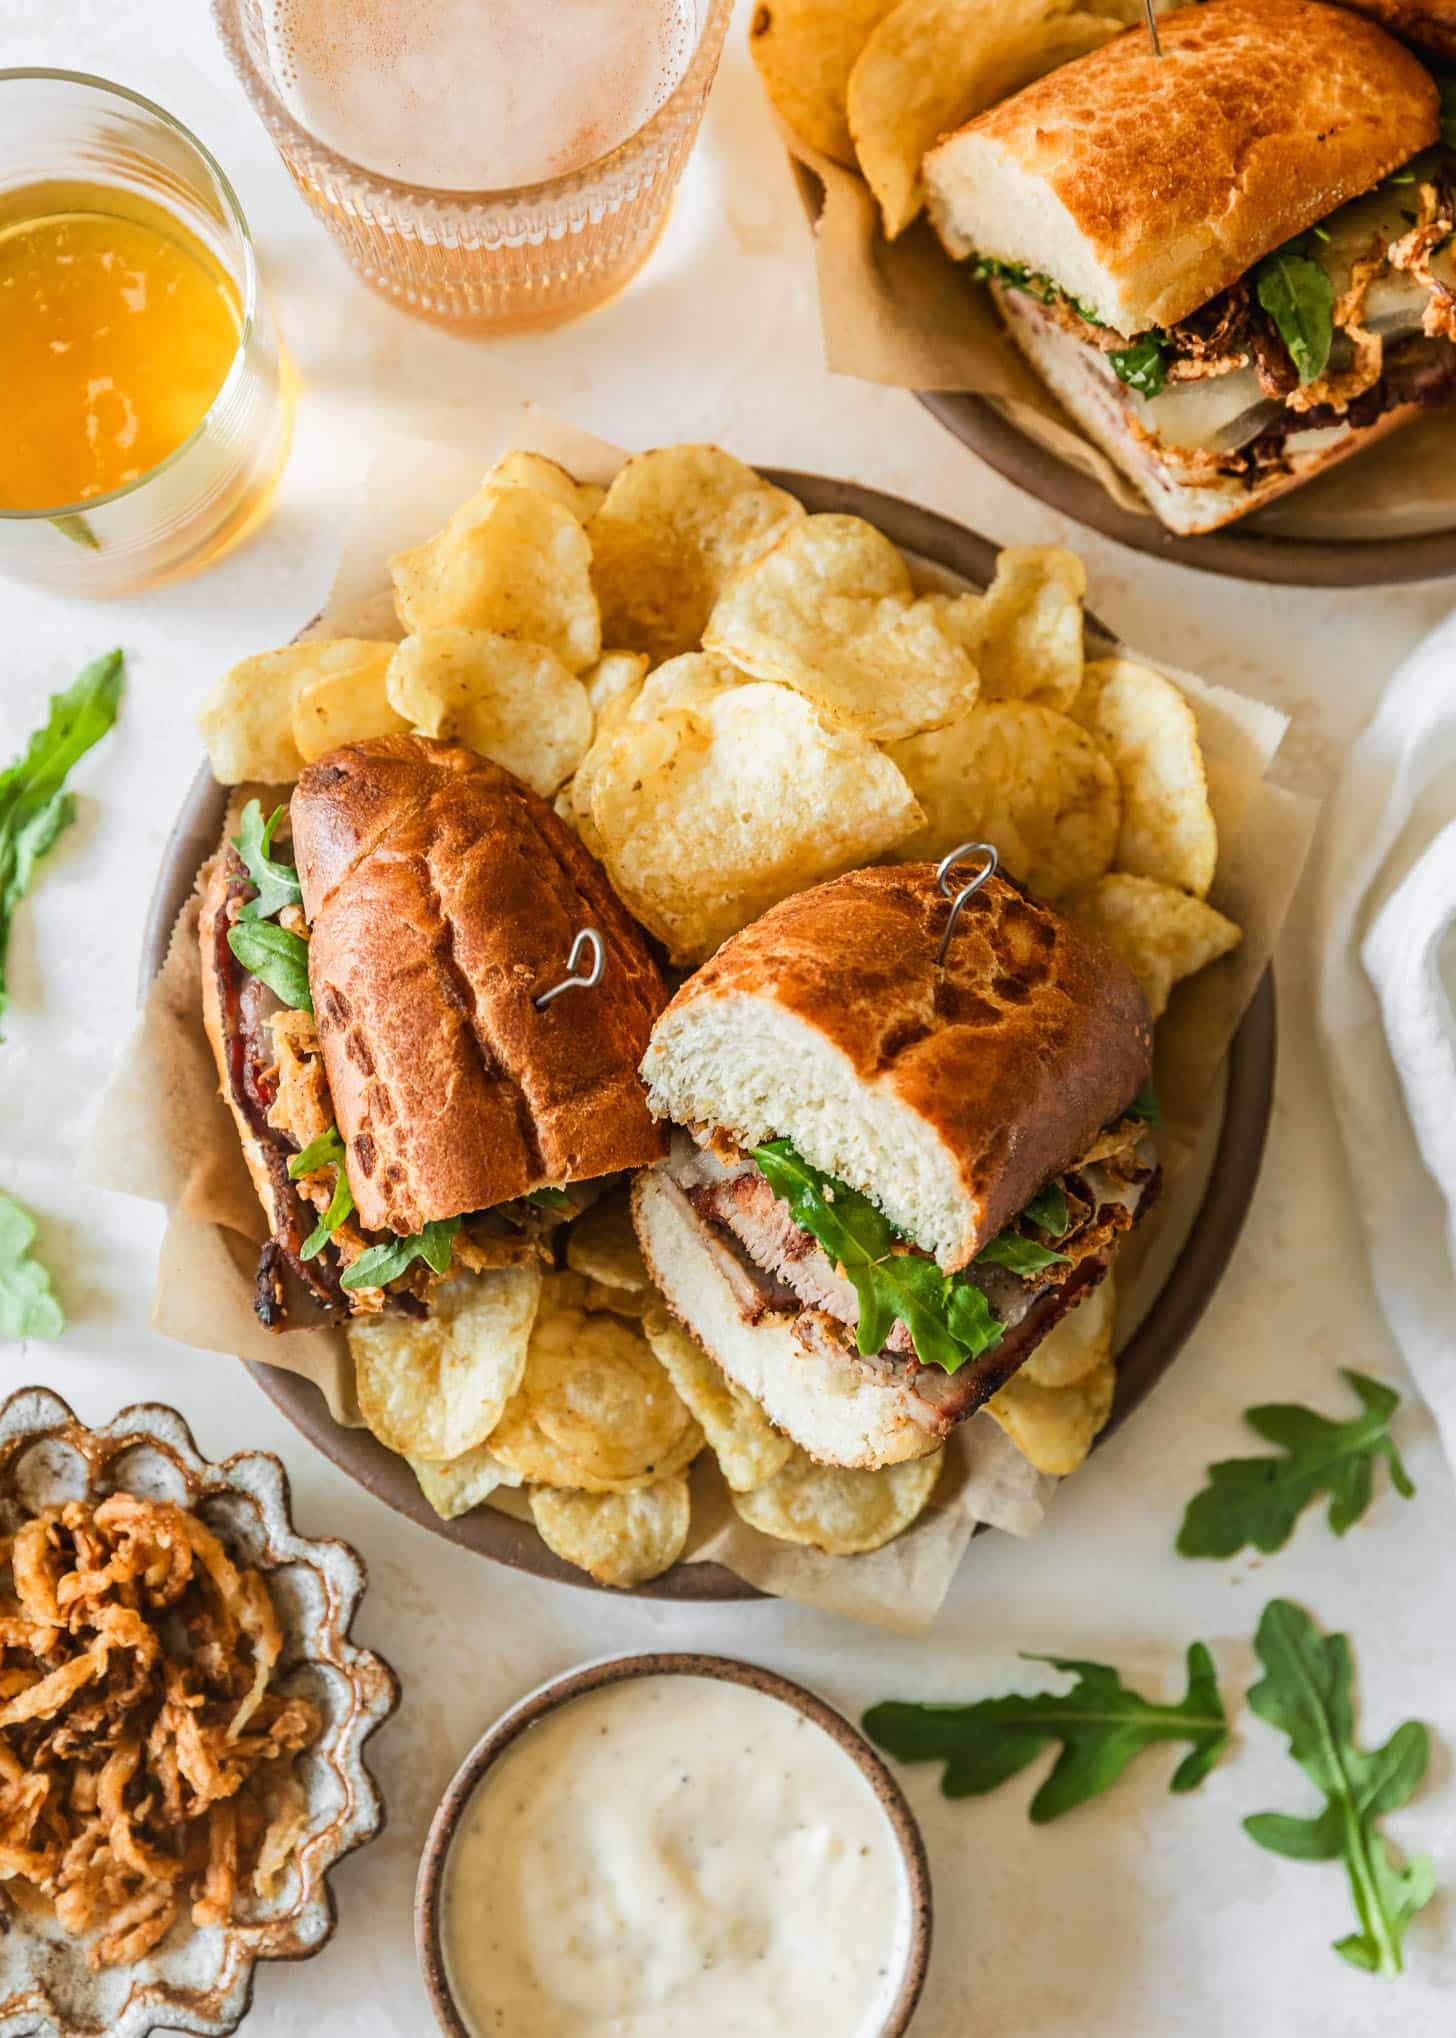 Two brown plates with tri-tip sandwiches and potato chips on a tan counter next to glasses of beer, arugula, and white and brown bowls of fried onions and garlic aioli.